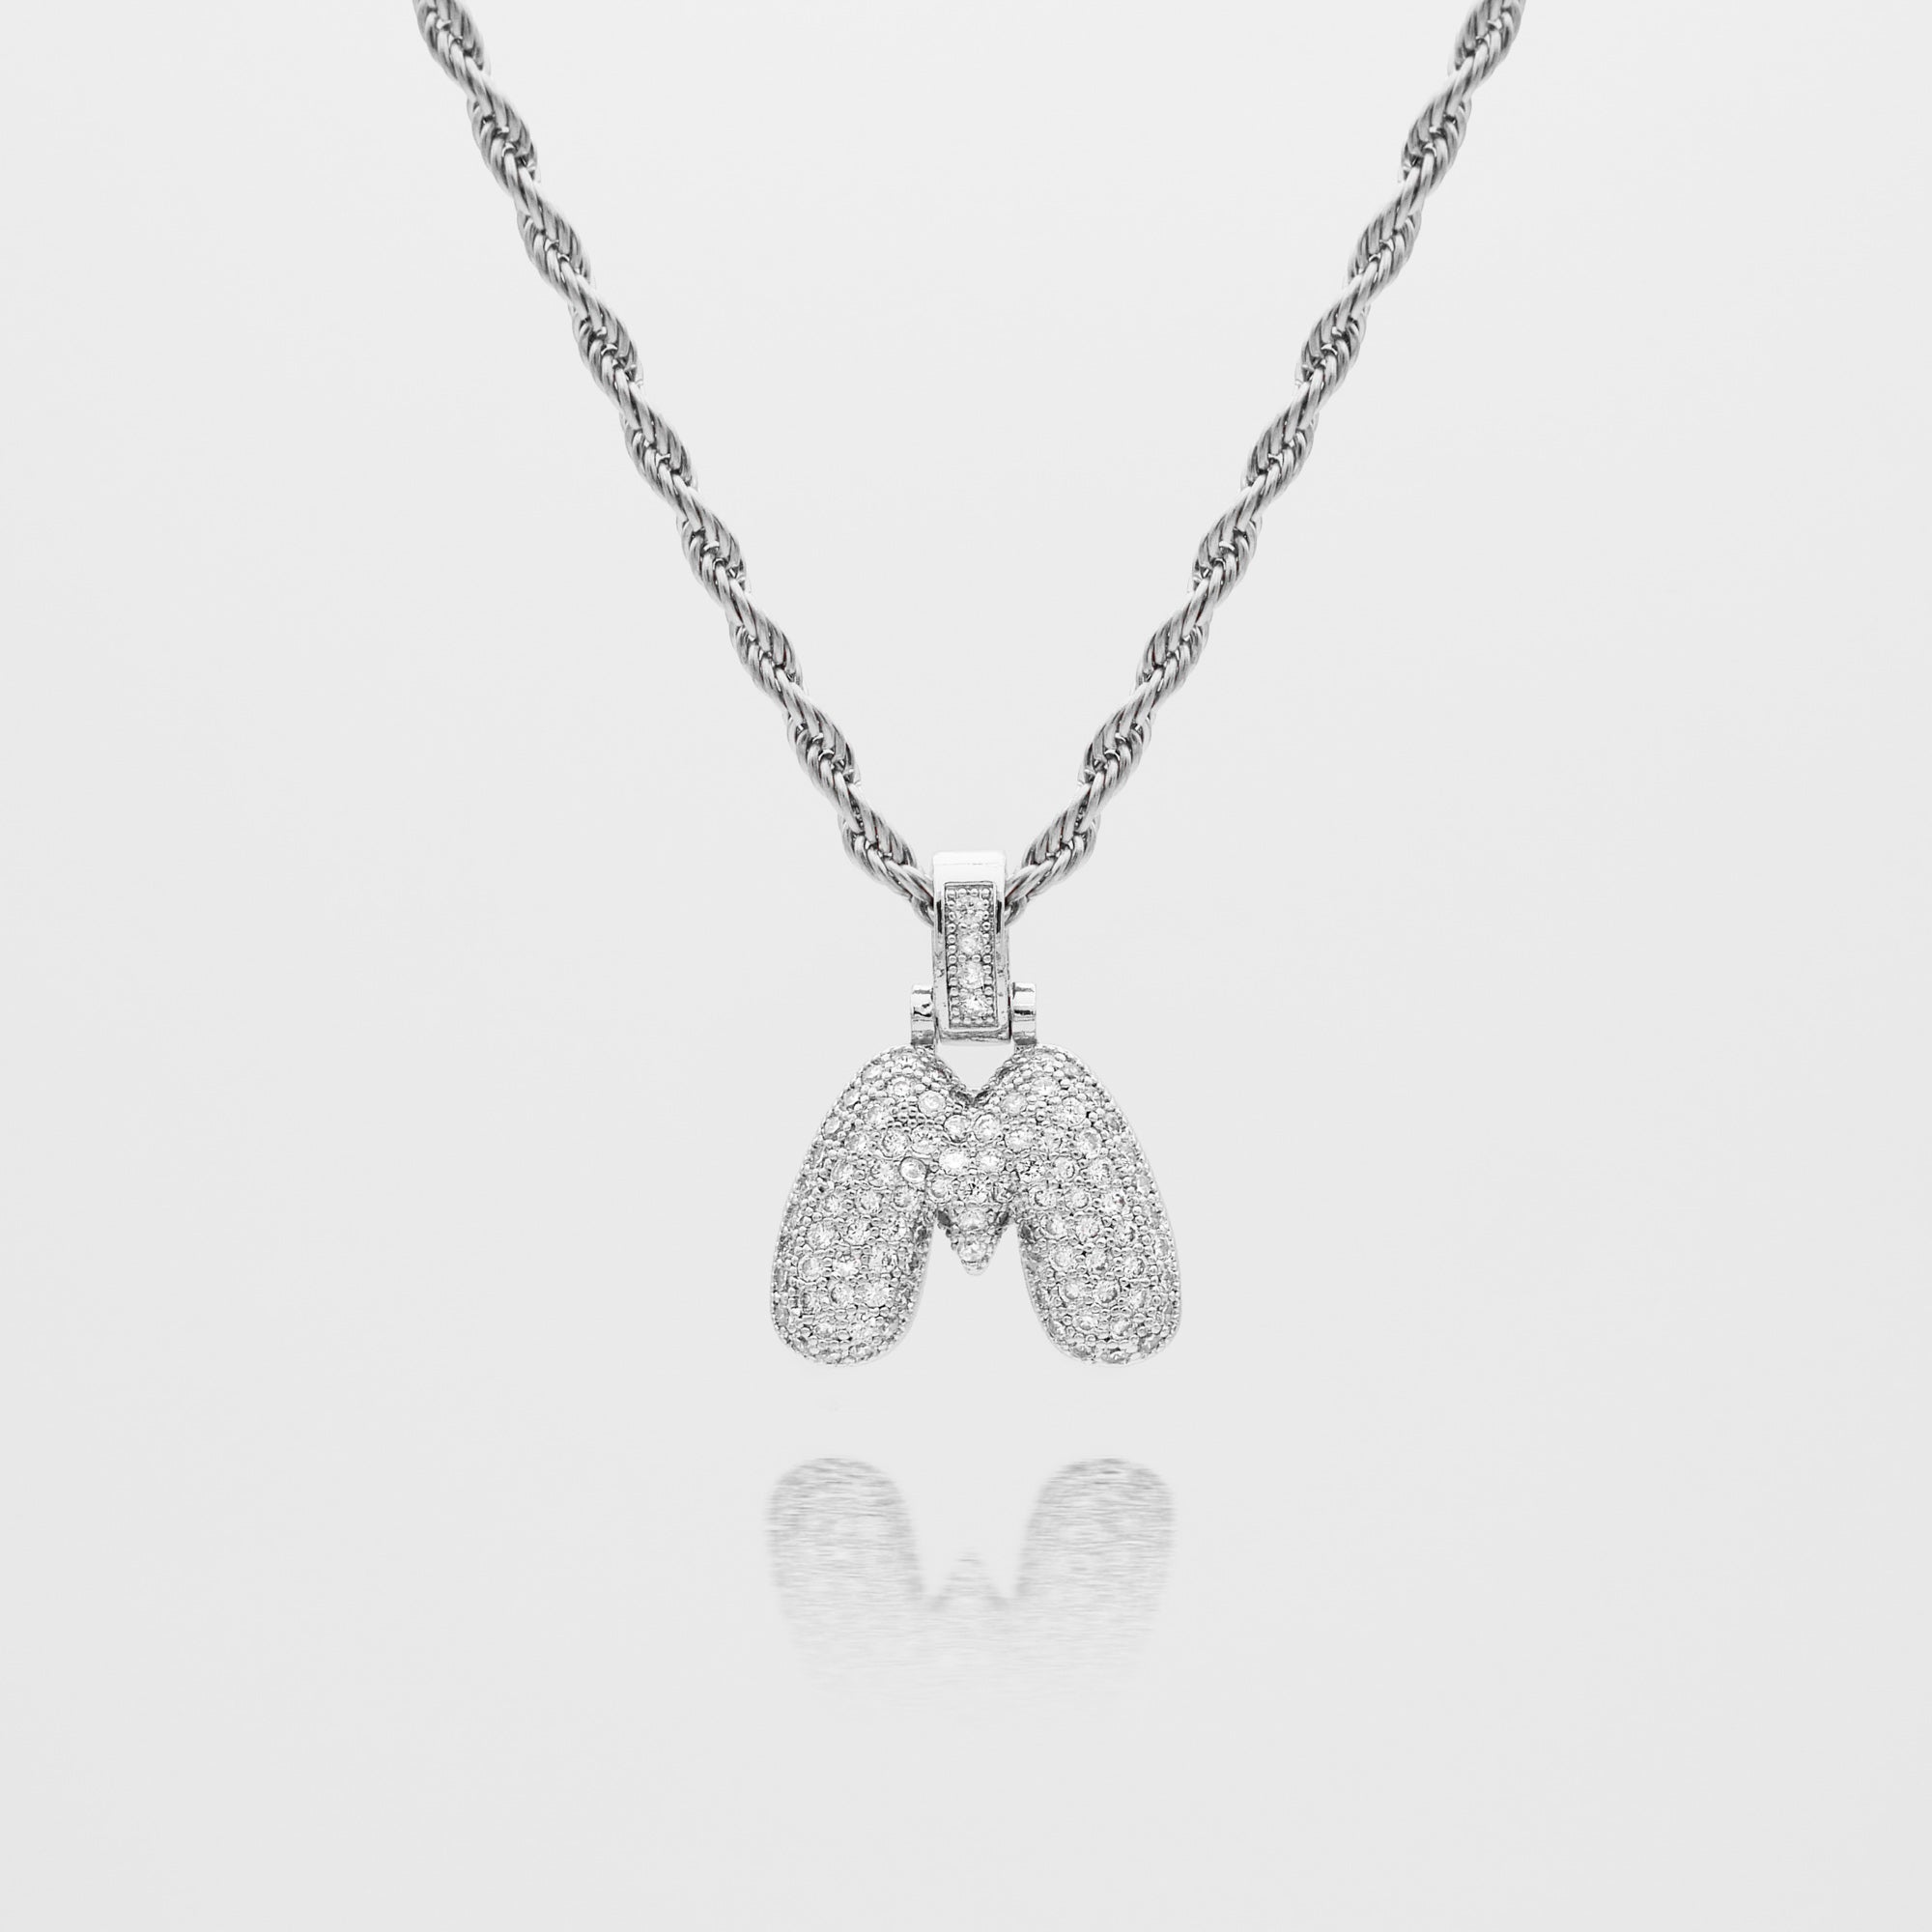 ICY Bubble Letter Initial Necklace